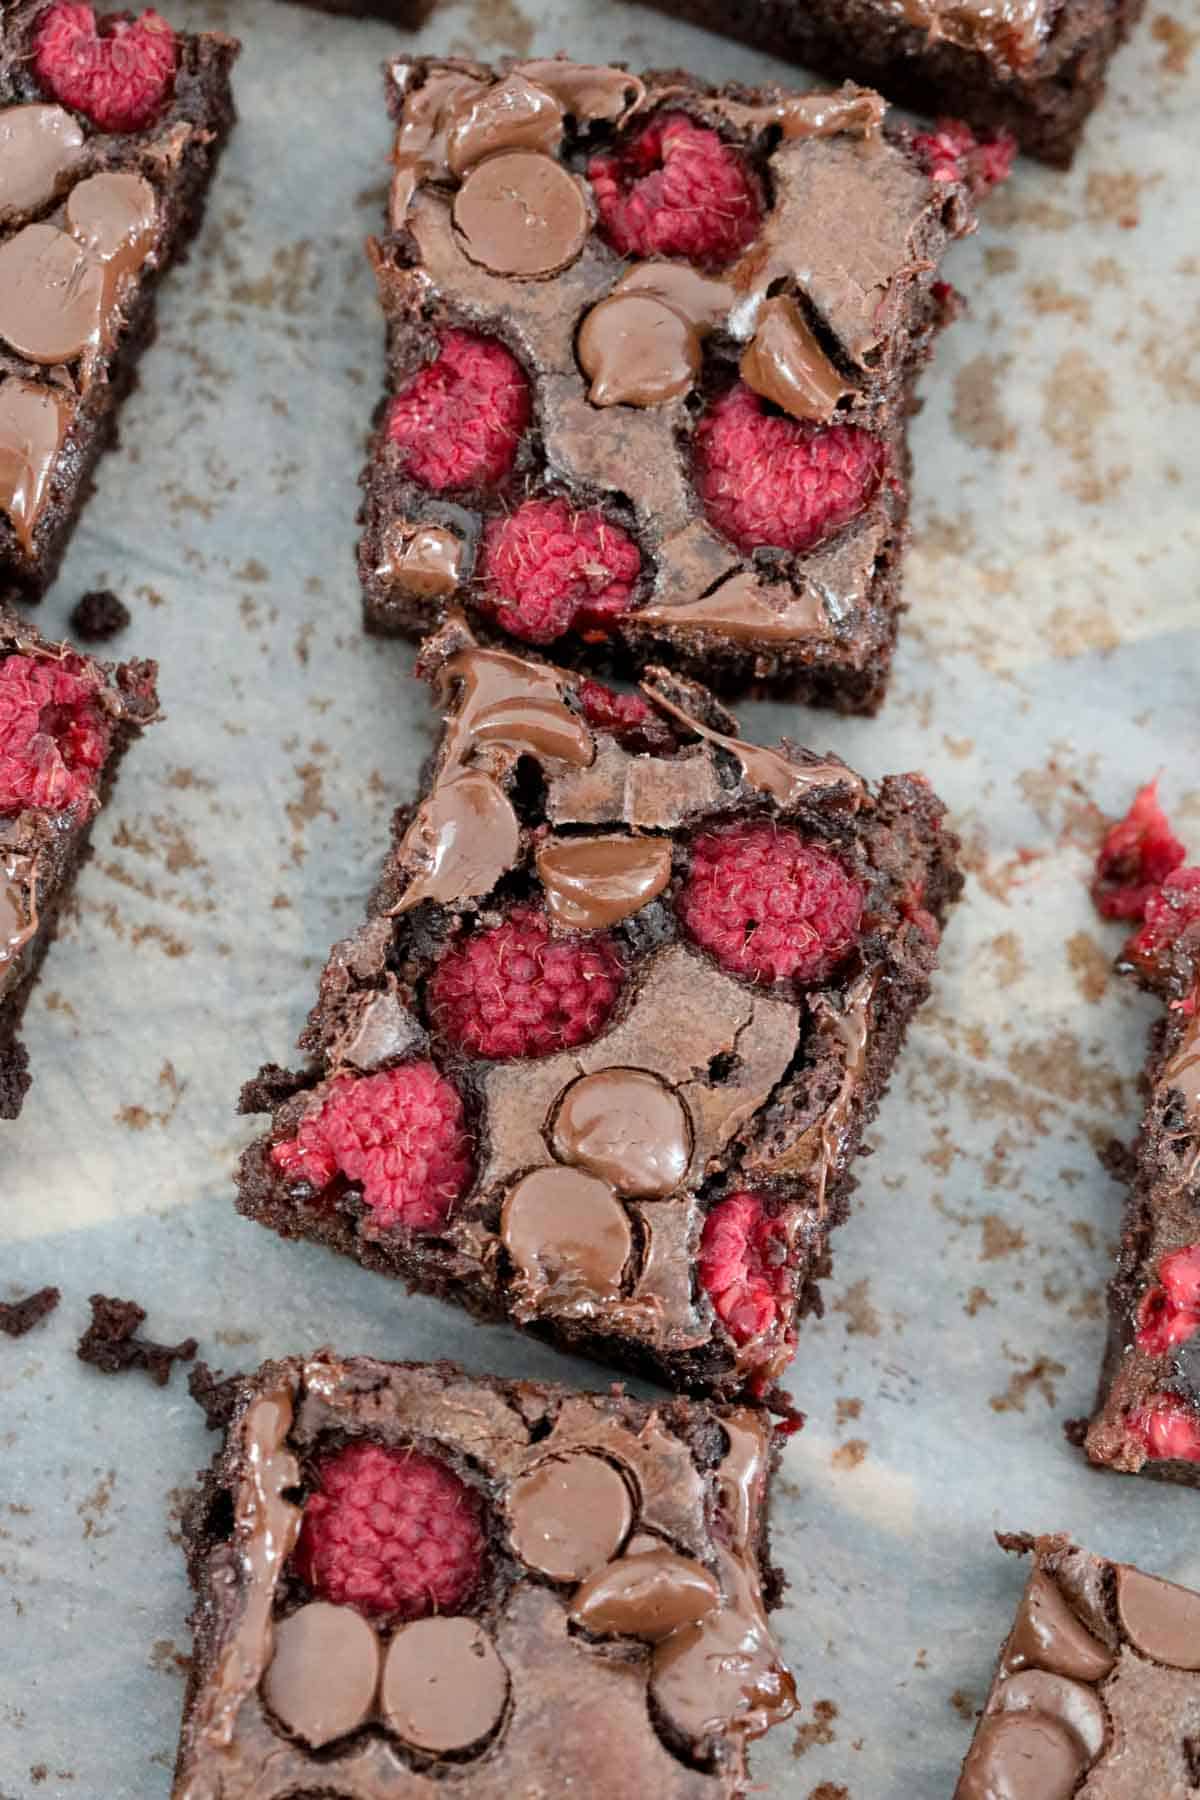 Raspberry brownie squares cut and placed on baking paper.